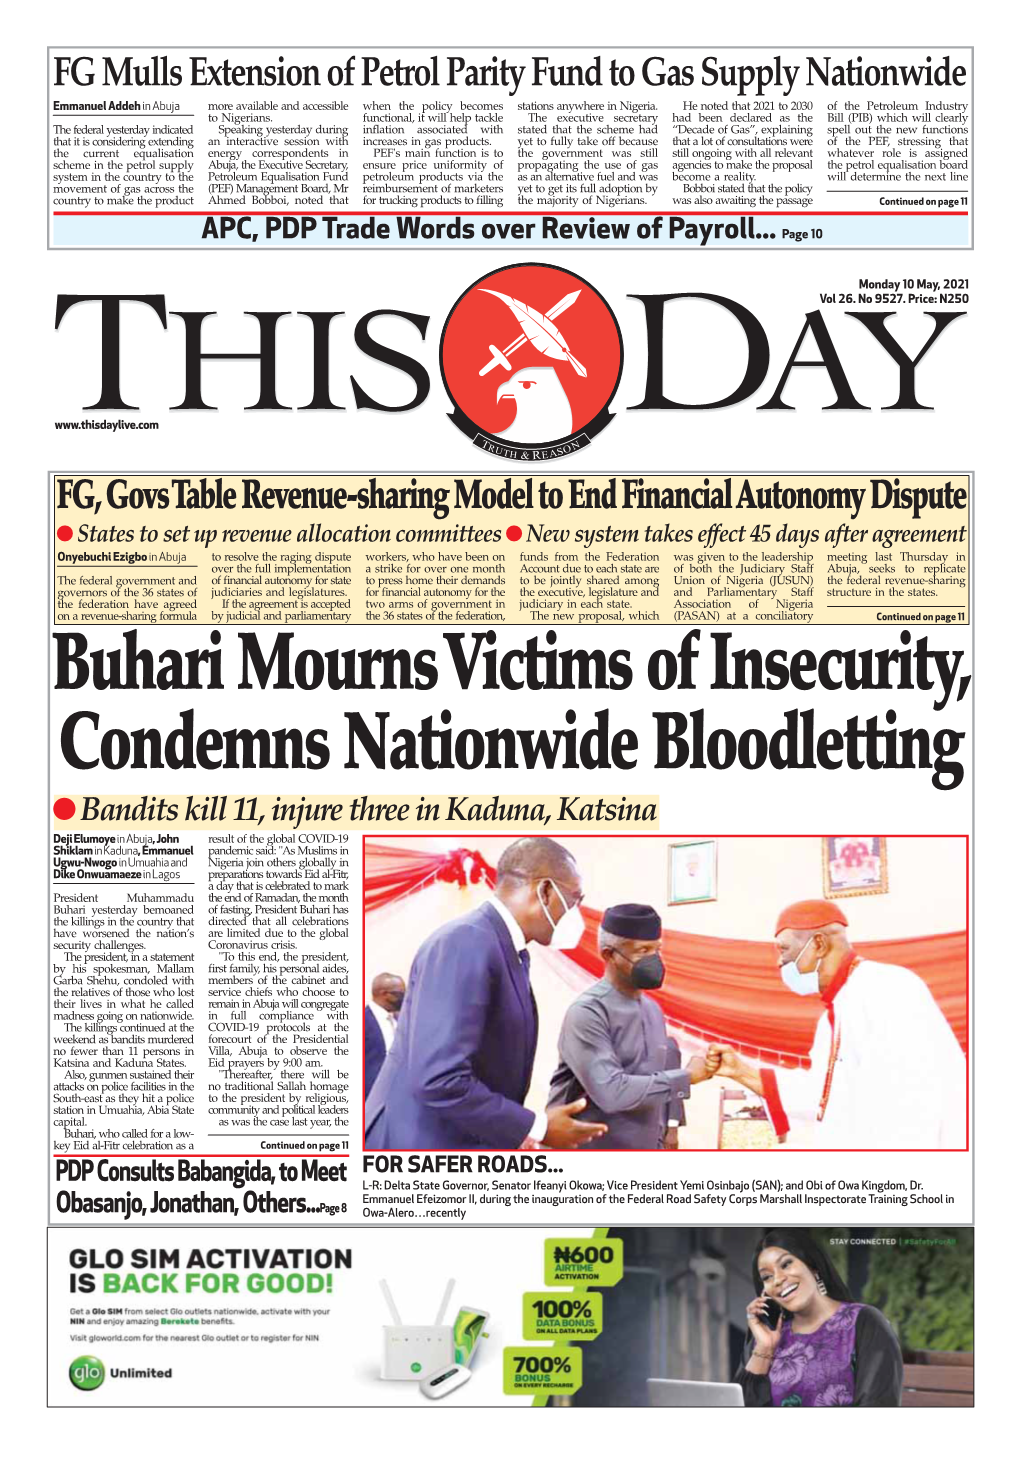 Buhari Mourns Victims of Insecurity, Condemns Nationwide Bloodletting